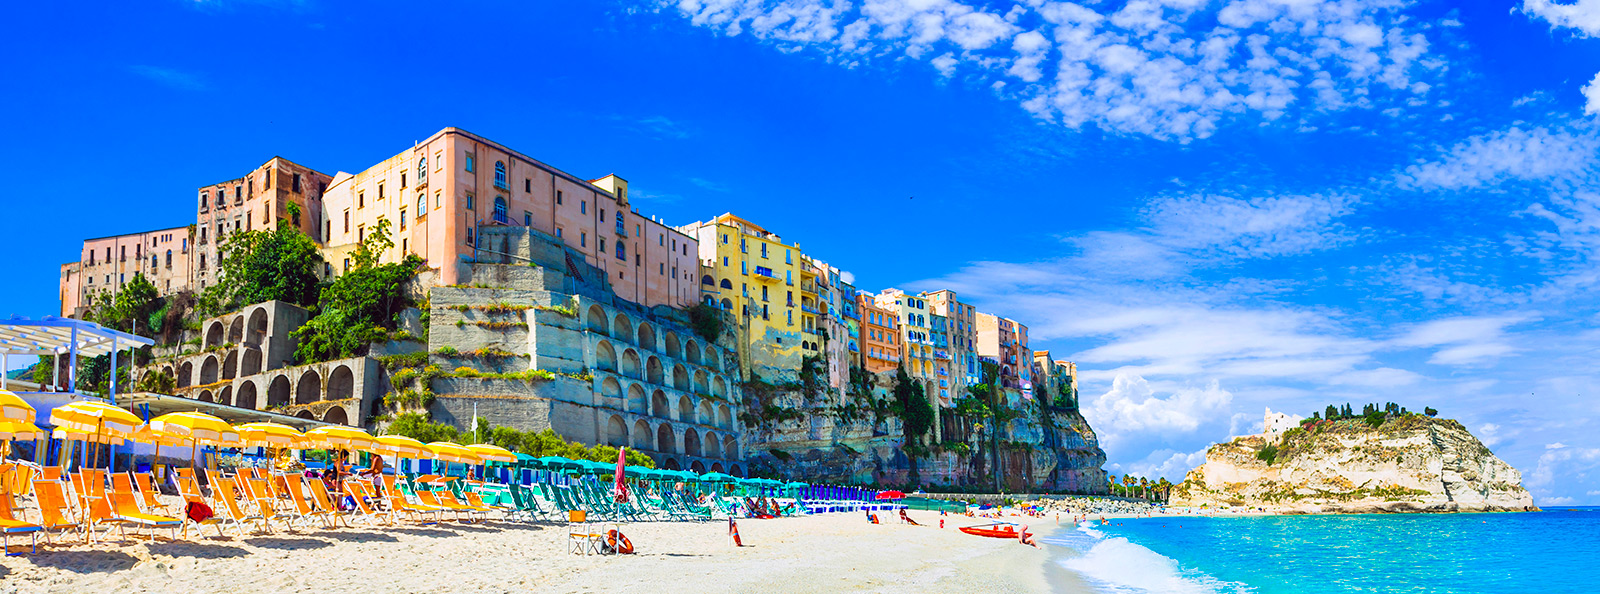 A look at Tropea